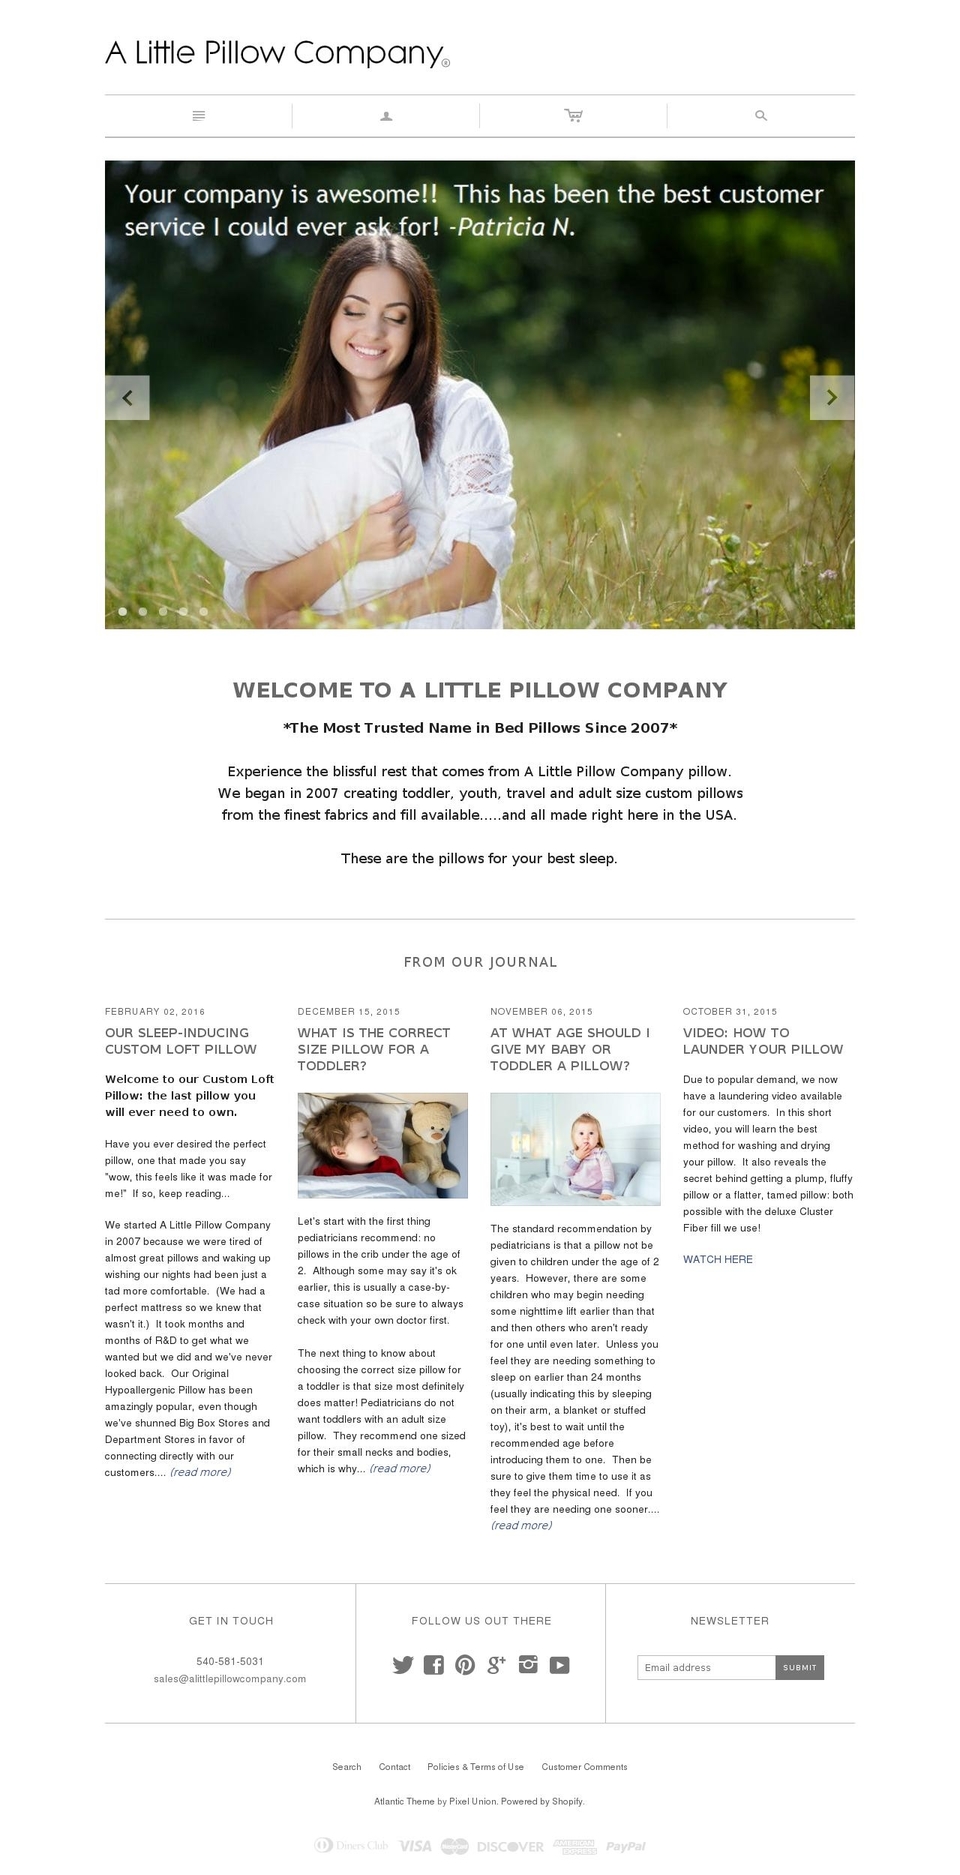 Craft Shopify theme site example alittlepillowcompany.com